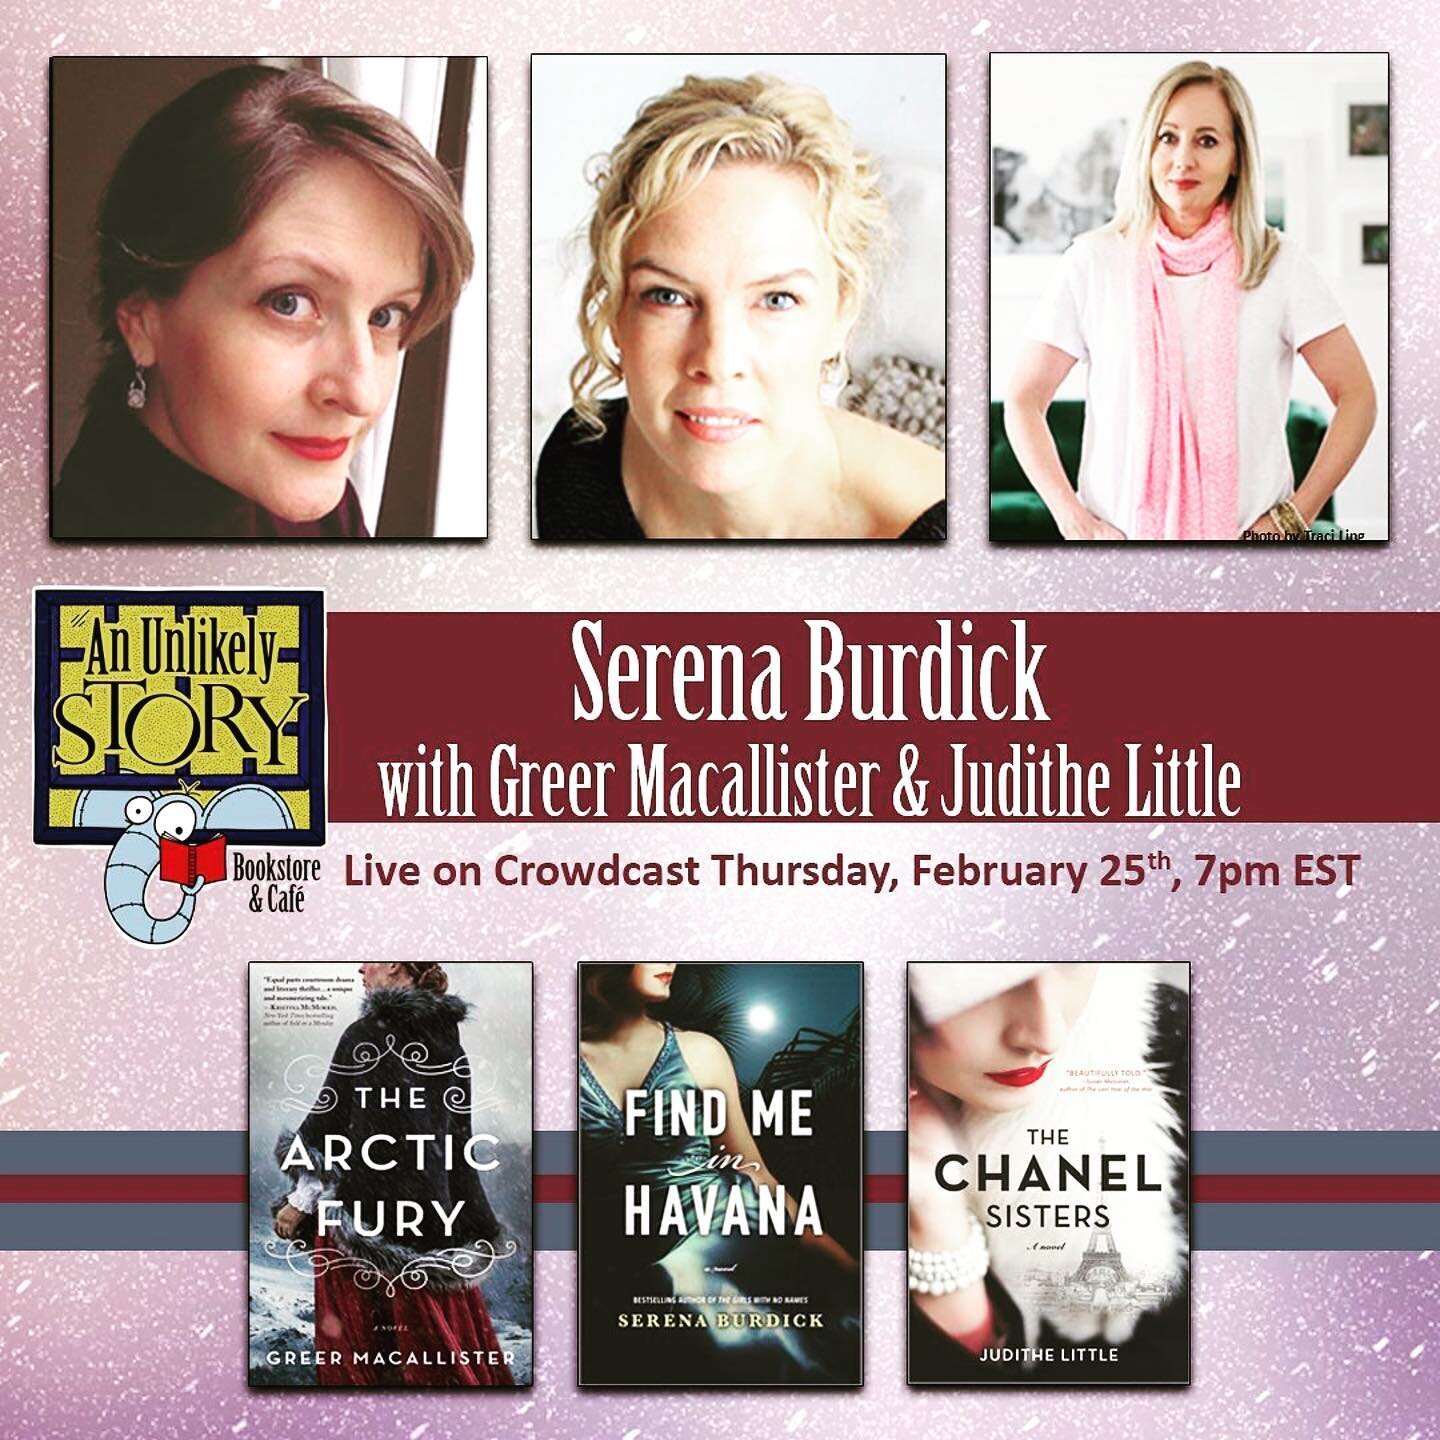 Hope you&rsquo;ll join us this THURSDAY! Link to register in bio!

👇🏼👇🏼👇🏼👇🏼👇🏼

#Repost @anunlikelystory
・・・
In a virtual event all historical fiction fans will love, @serenaburdick, author of the international bestseller of THE GIRLS WITH N